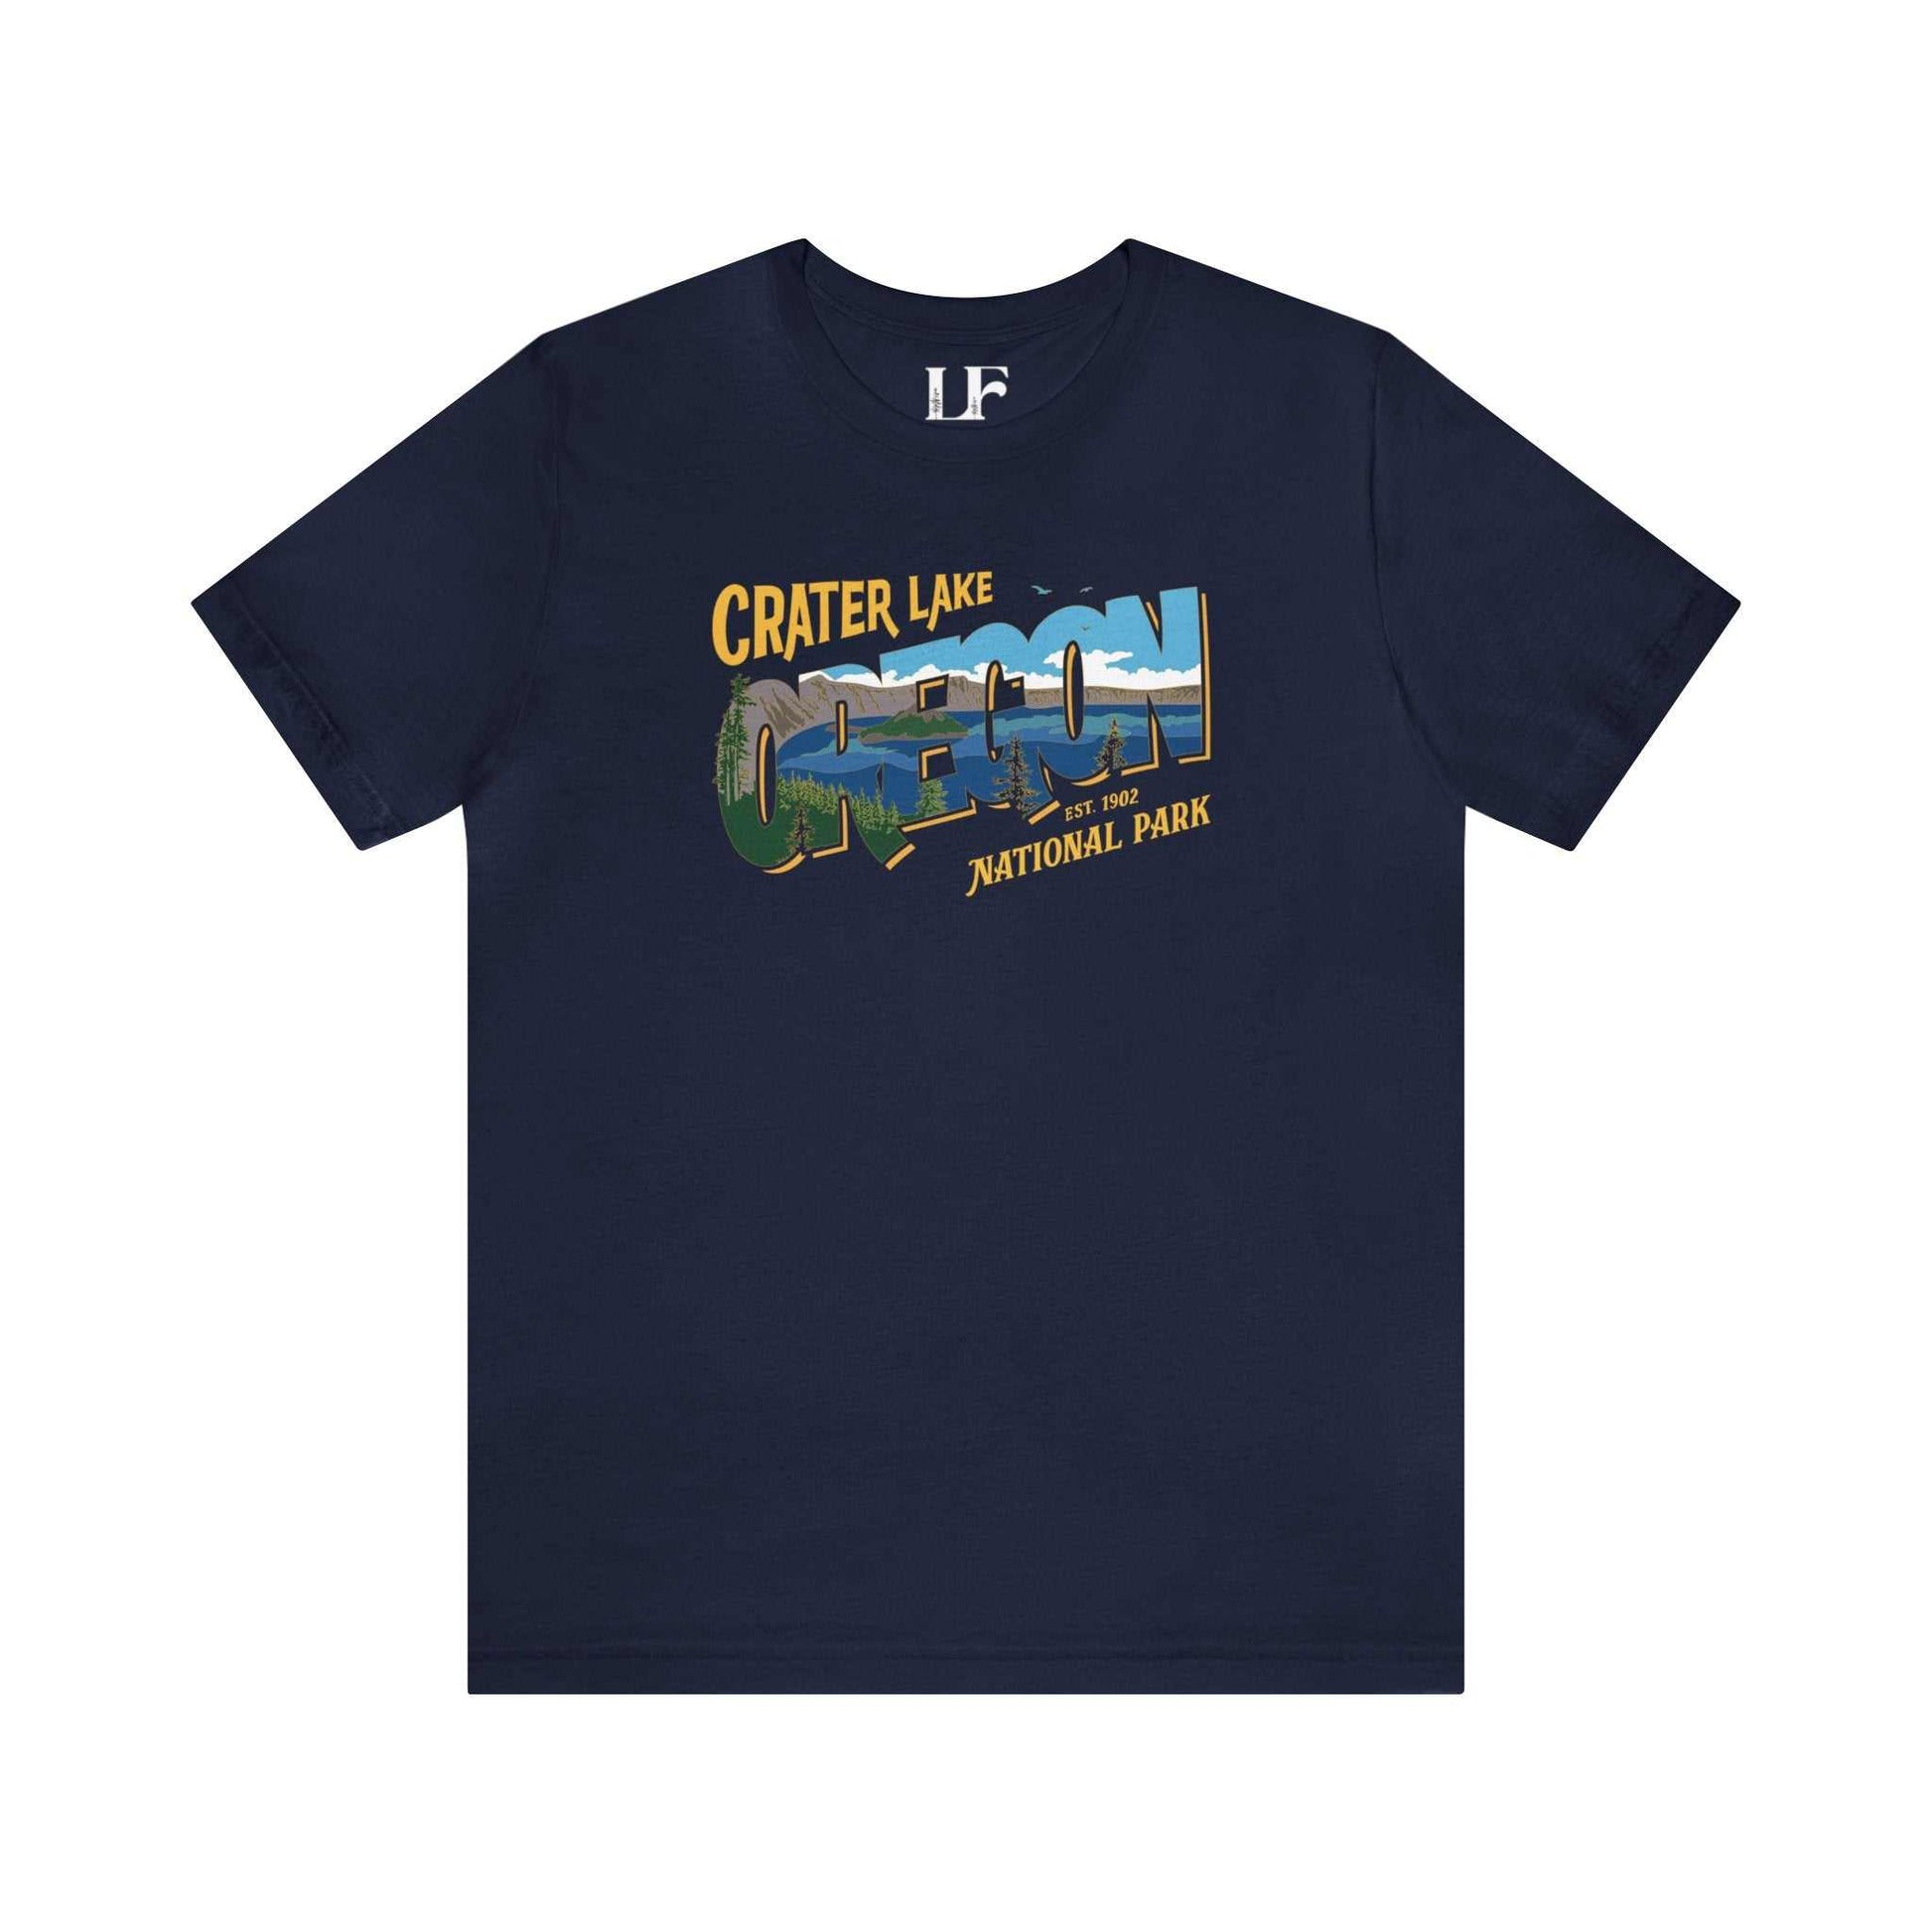 Crater Lake National Park ShirtRep your favorite park and state with this Crater Lake National Park of Oregon into your wardrobe. Featuring it's best feature, the famous Crater Lake.
Details:
- 10